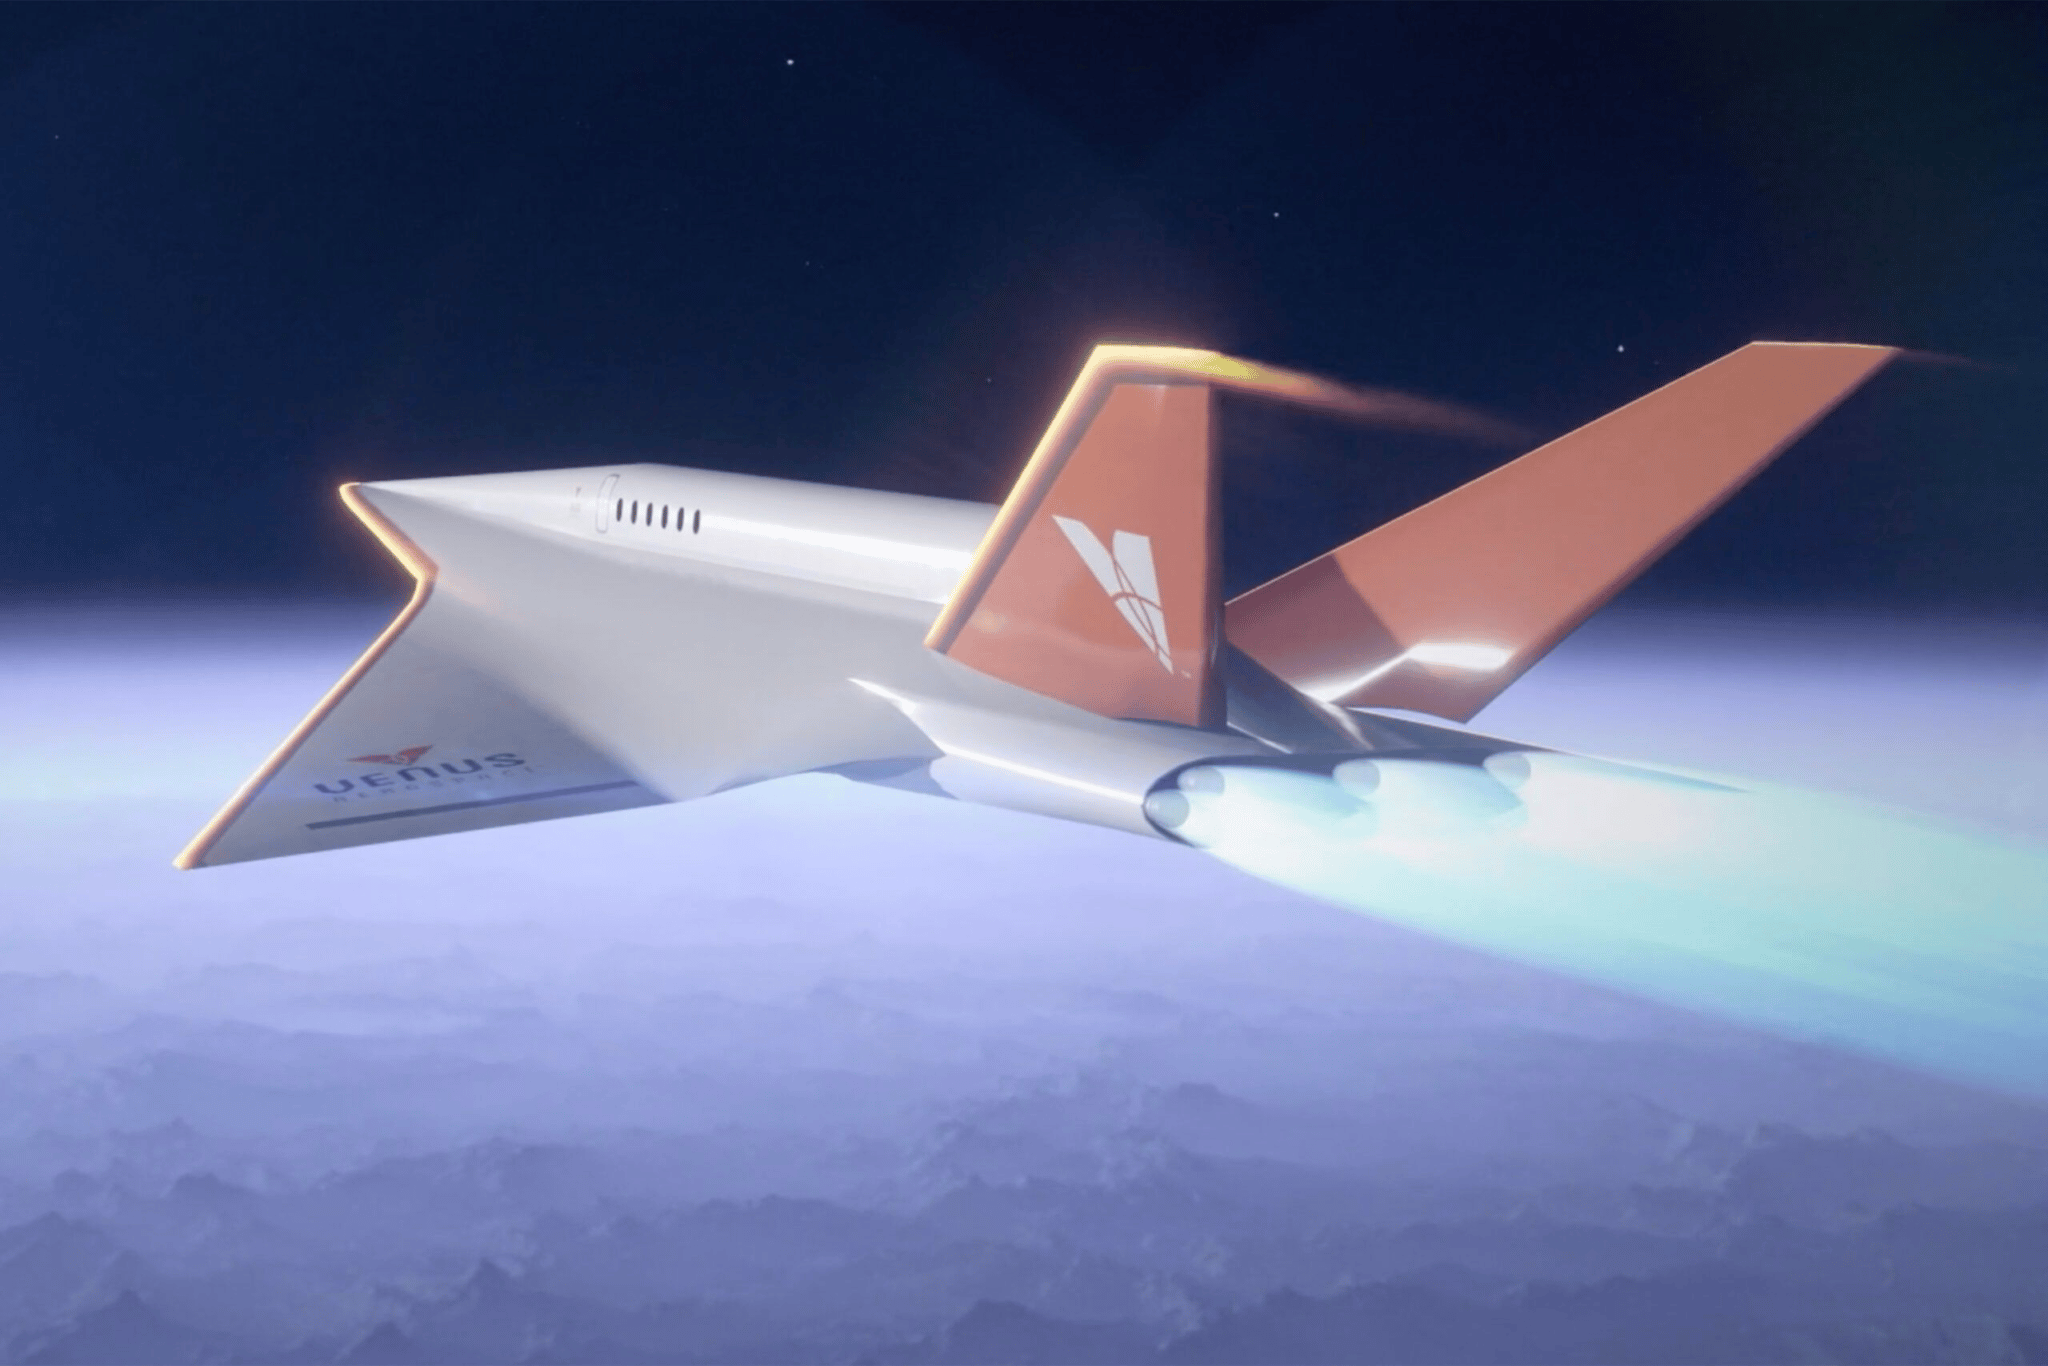 Characteristics of the future Stargazer hypersonic aircraft have been published